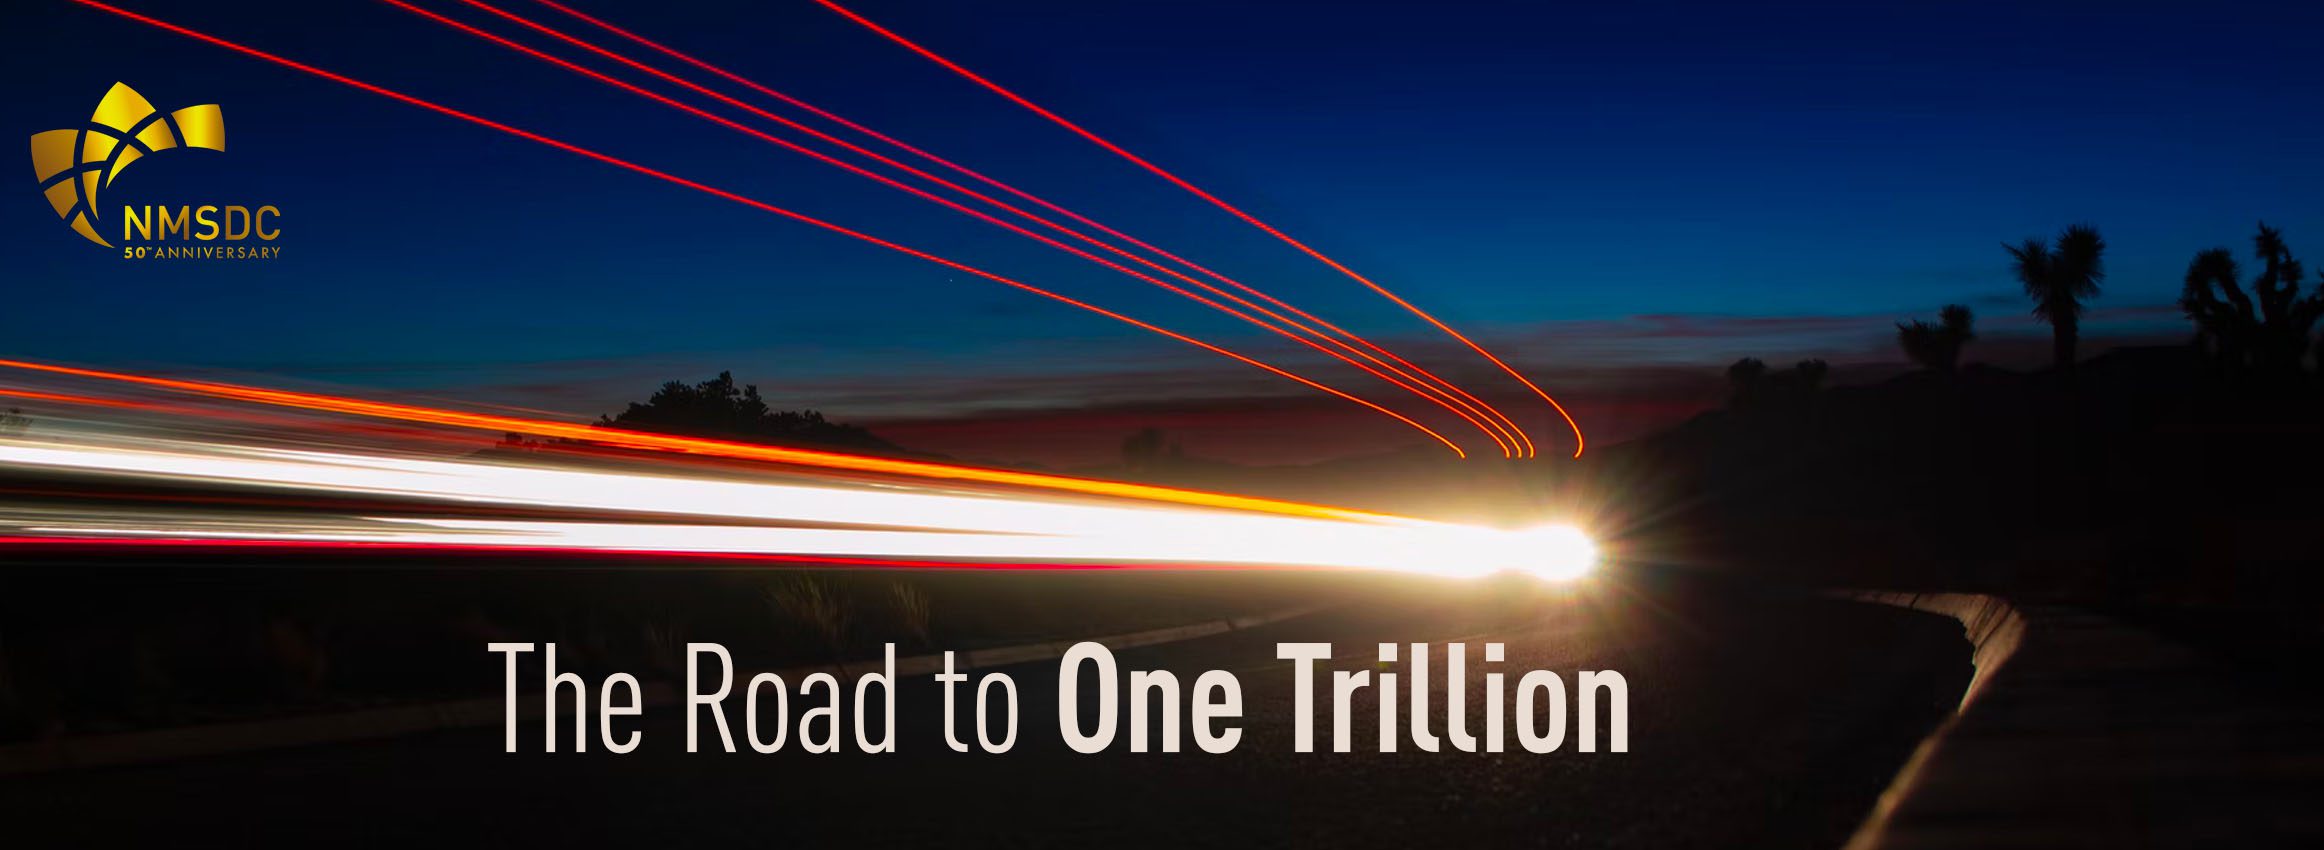 NMSDC Road to One Trillion